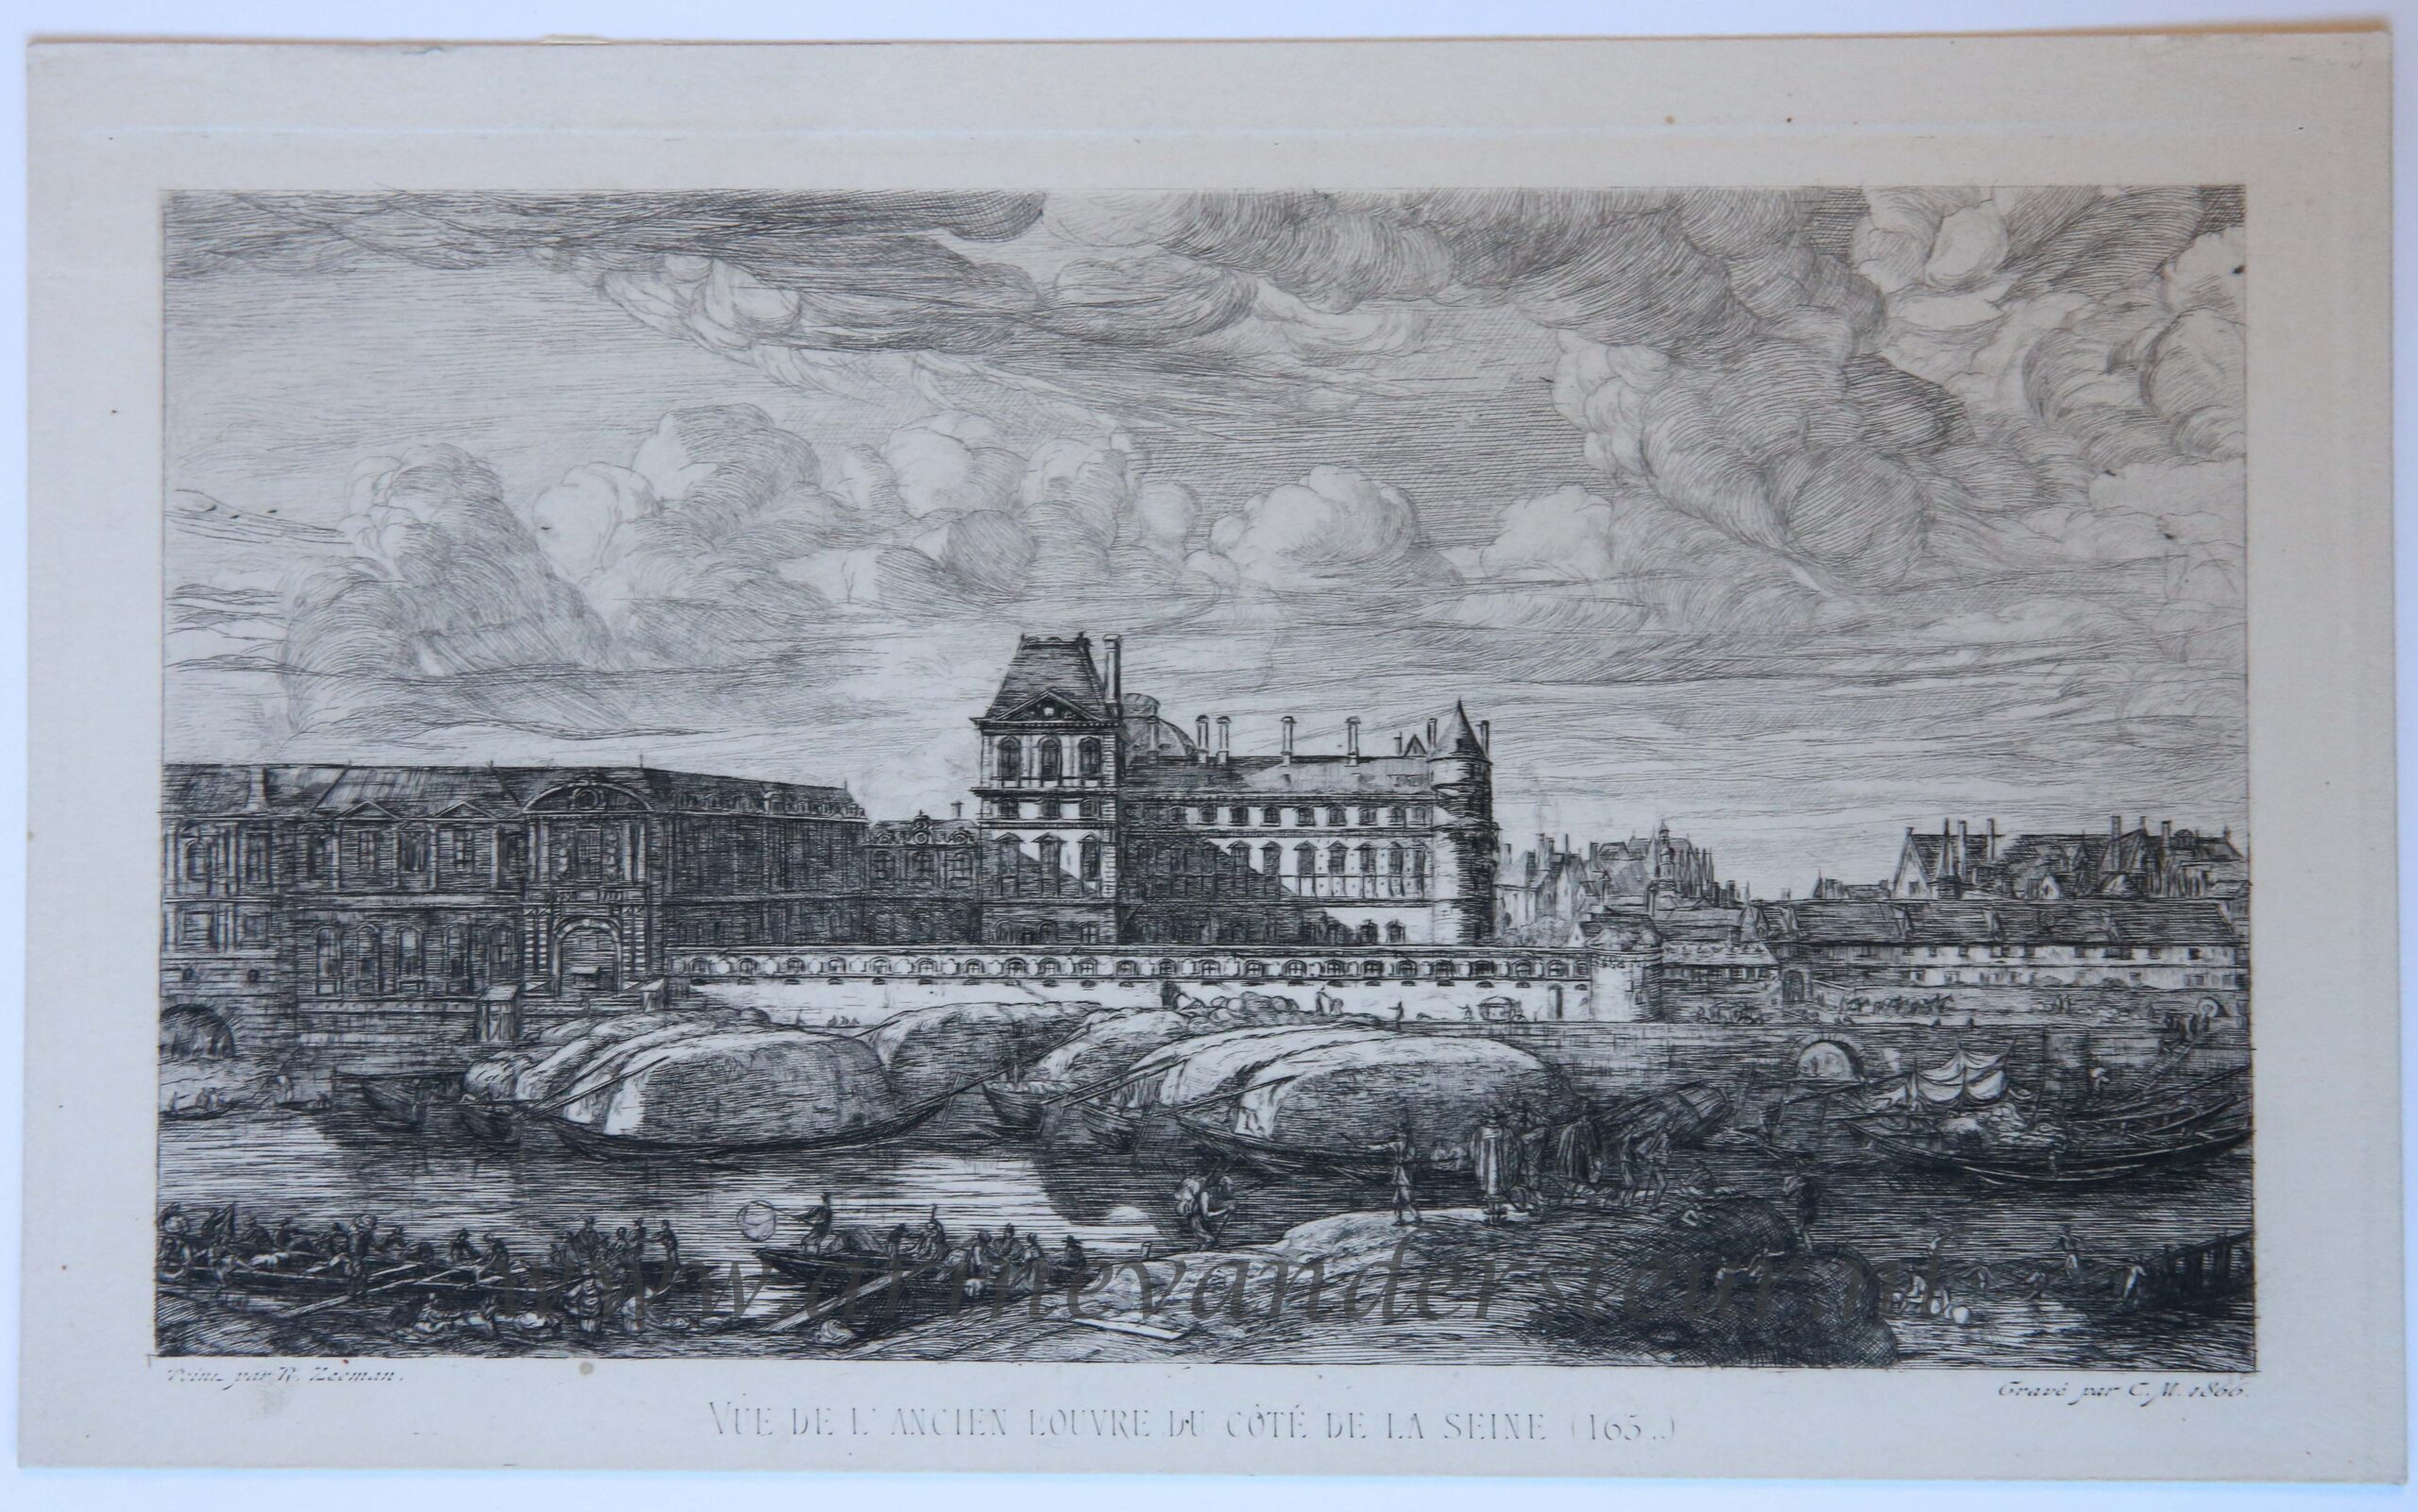 [Antique print, Etching on chine collé] The old Louvre/Het Louvre museum in Parijs, published 1866.